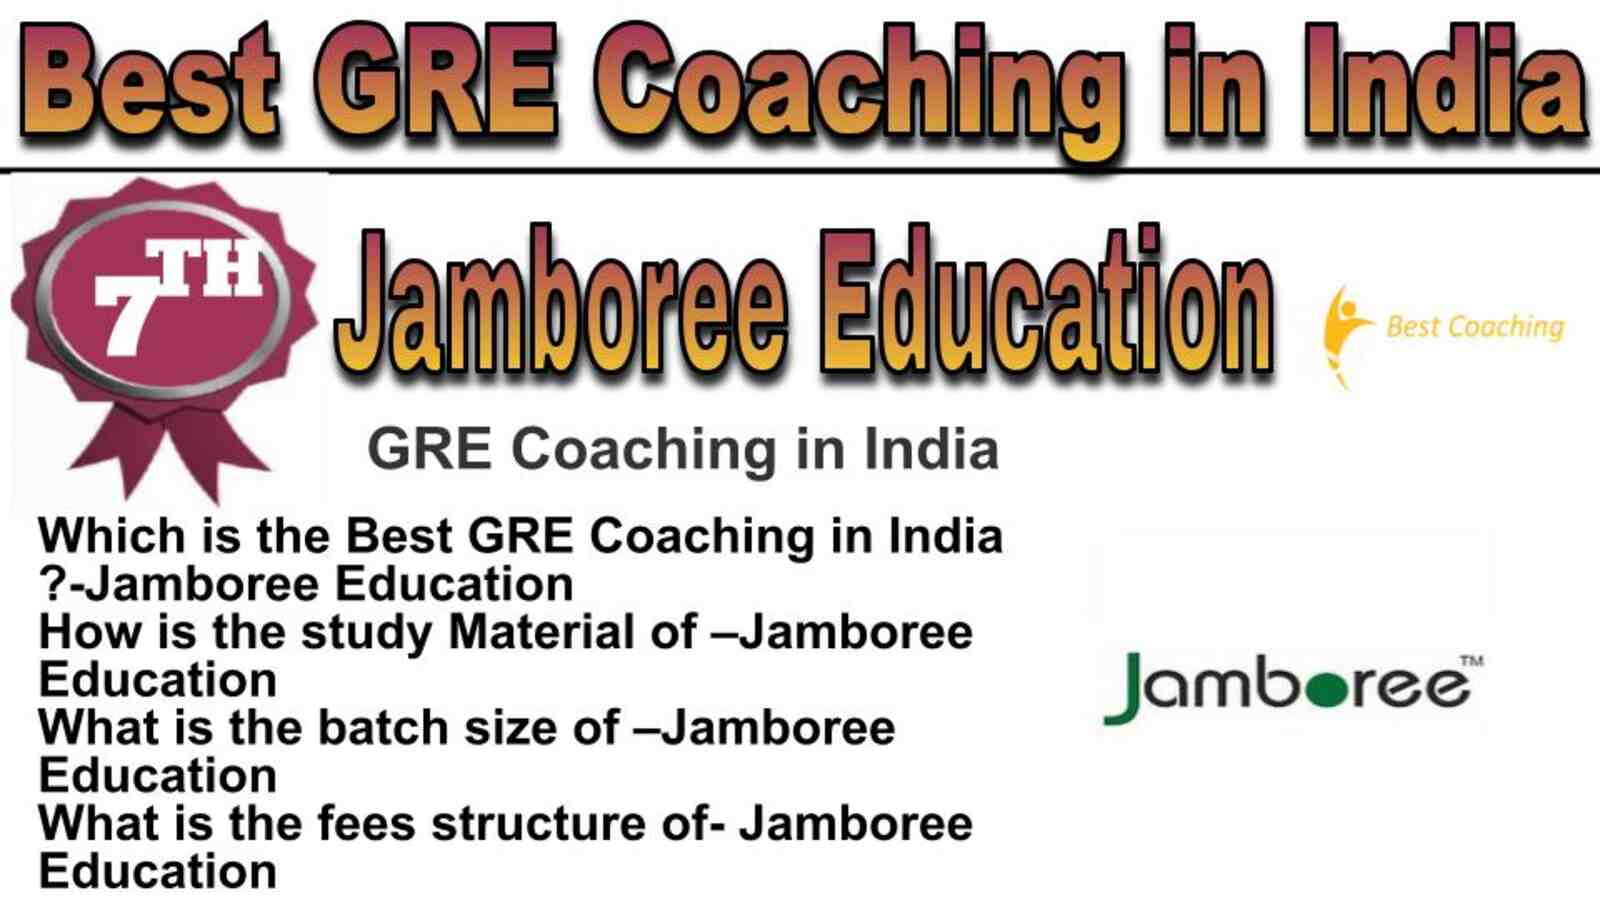 Rank 7 best GRE coaching in India